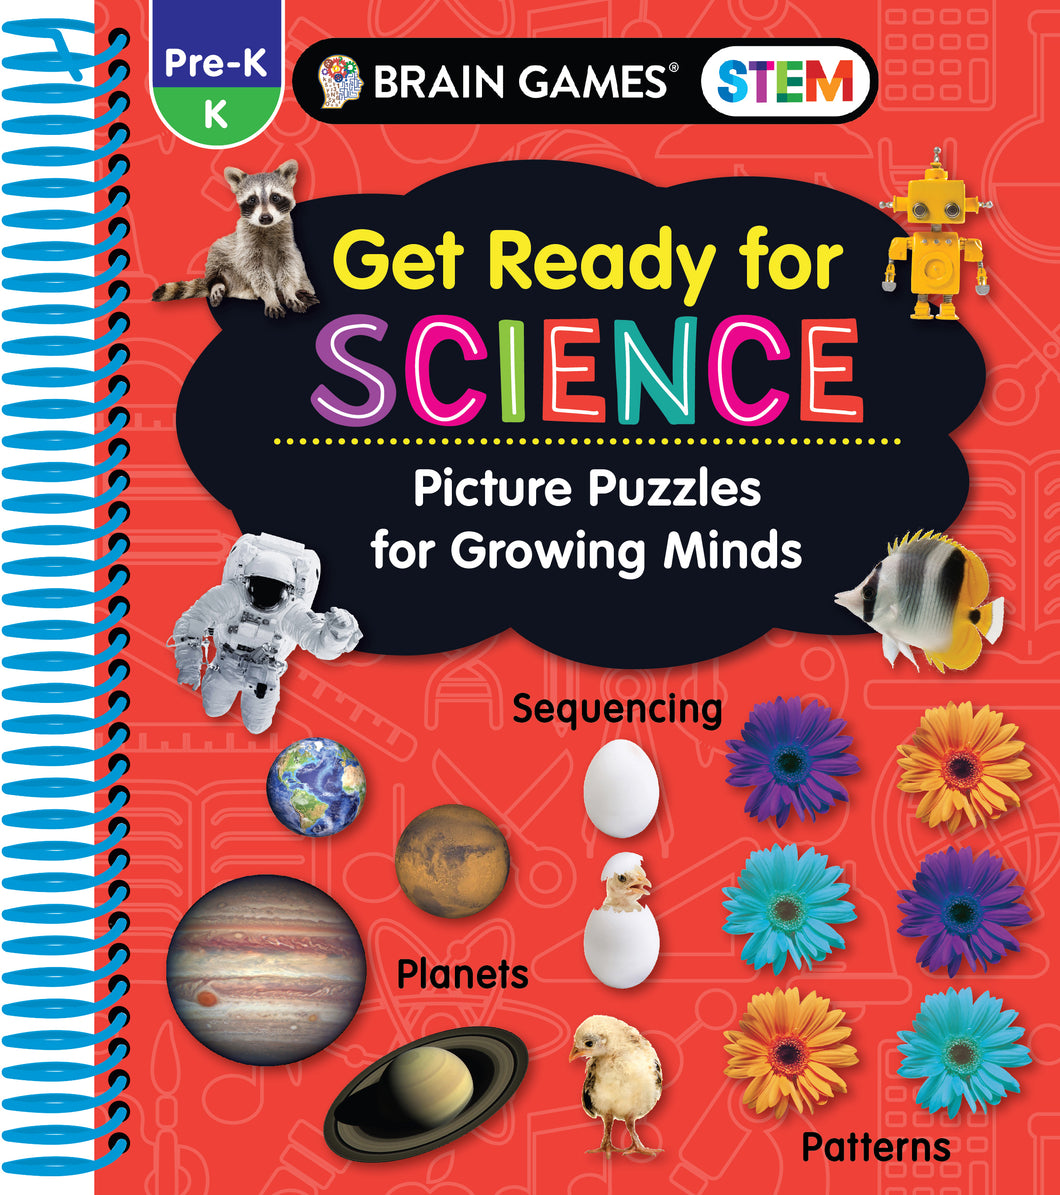 Brain Games STEM Get Ready for Science